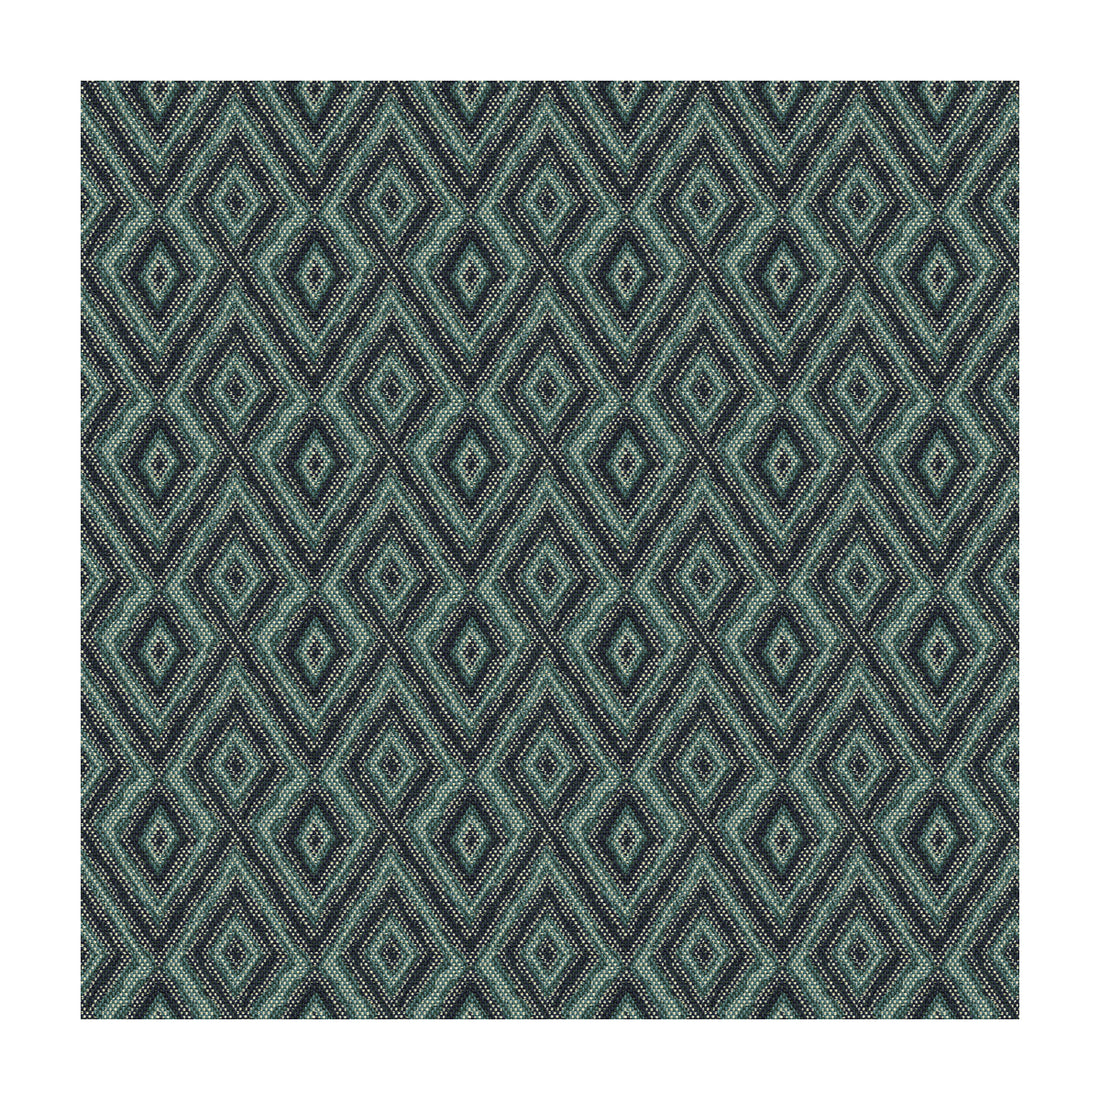 Kravet Design fabric in 33881-5 color - pattern 33881.5.0 - by Kravet Design in the Tanzania J Banks collection